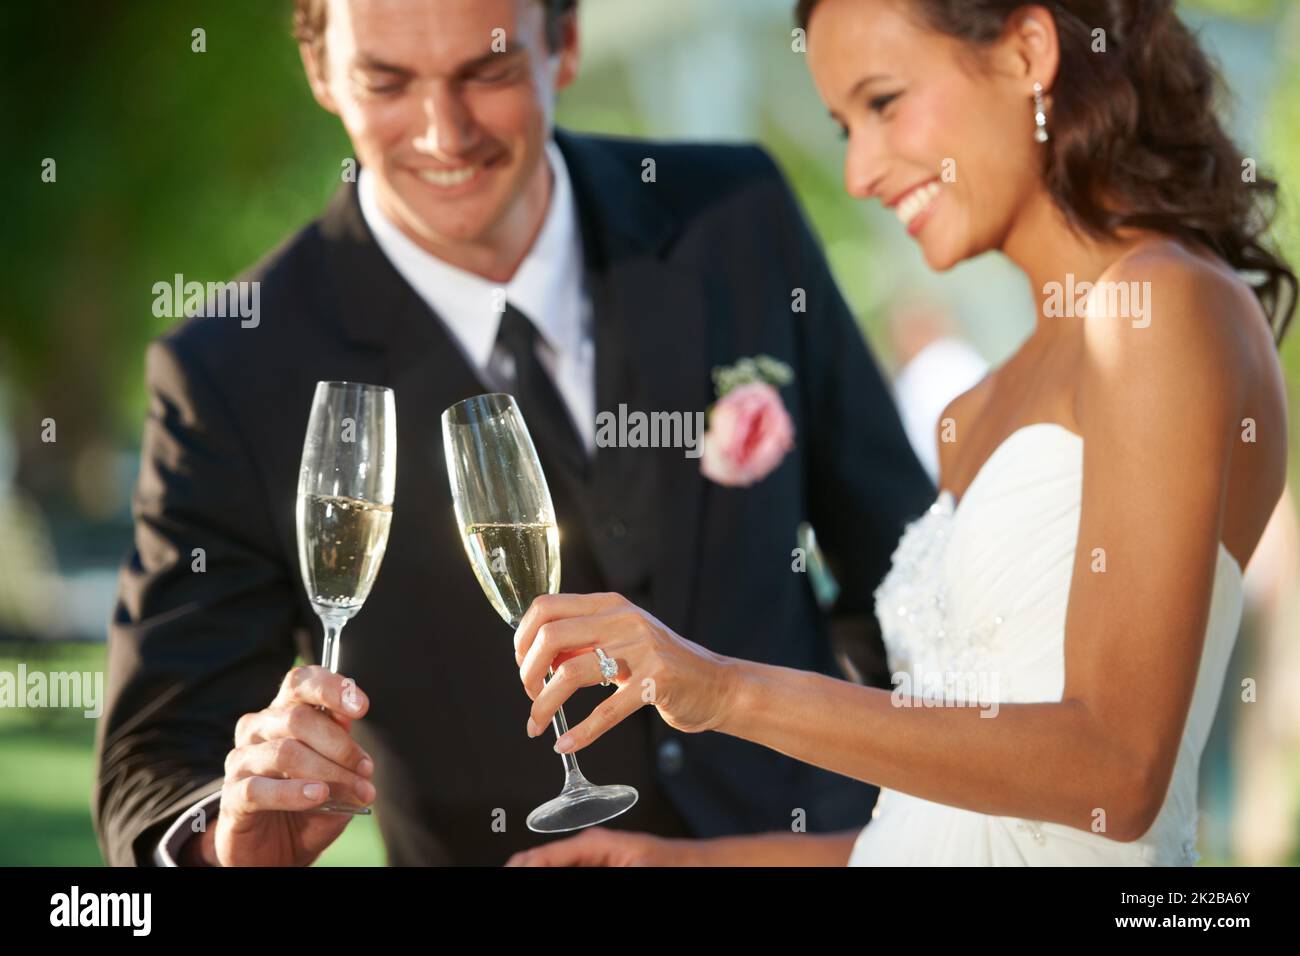 Heres to our romance. Cropped view of a young bride and groom standing together and toasting their marriage. Stock Photo